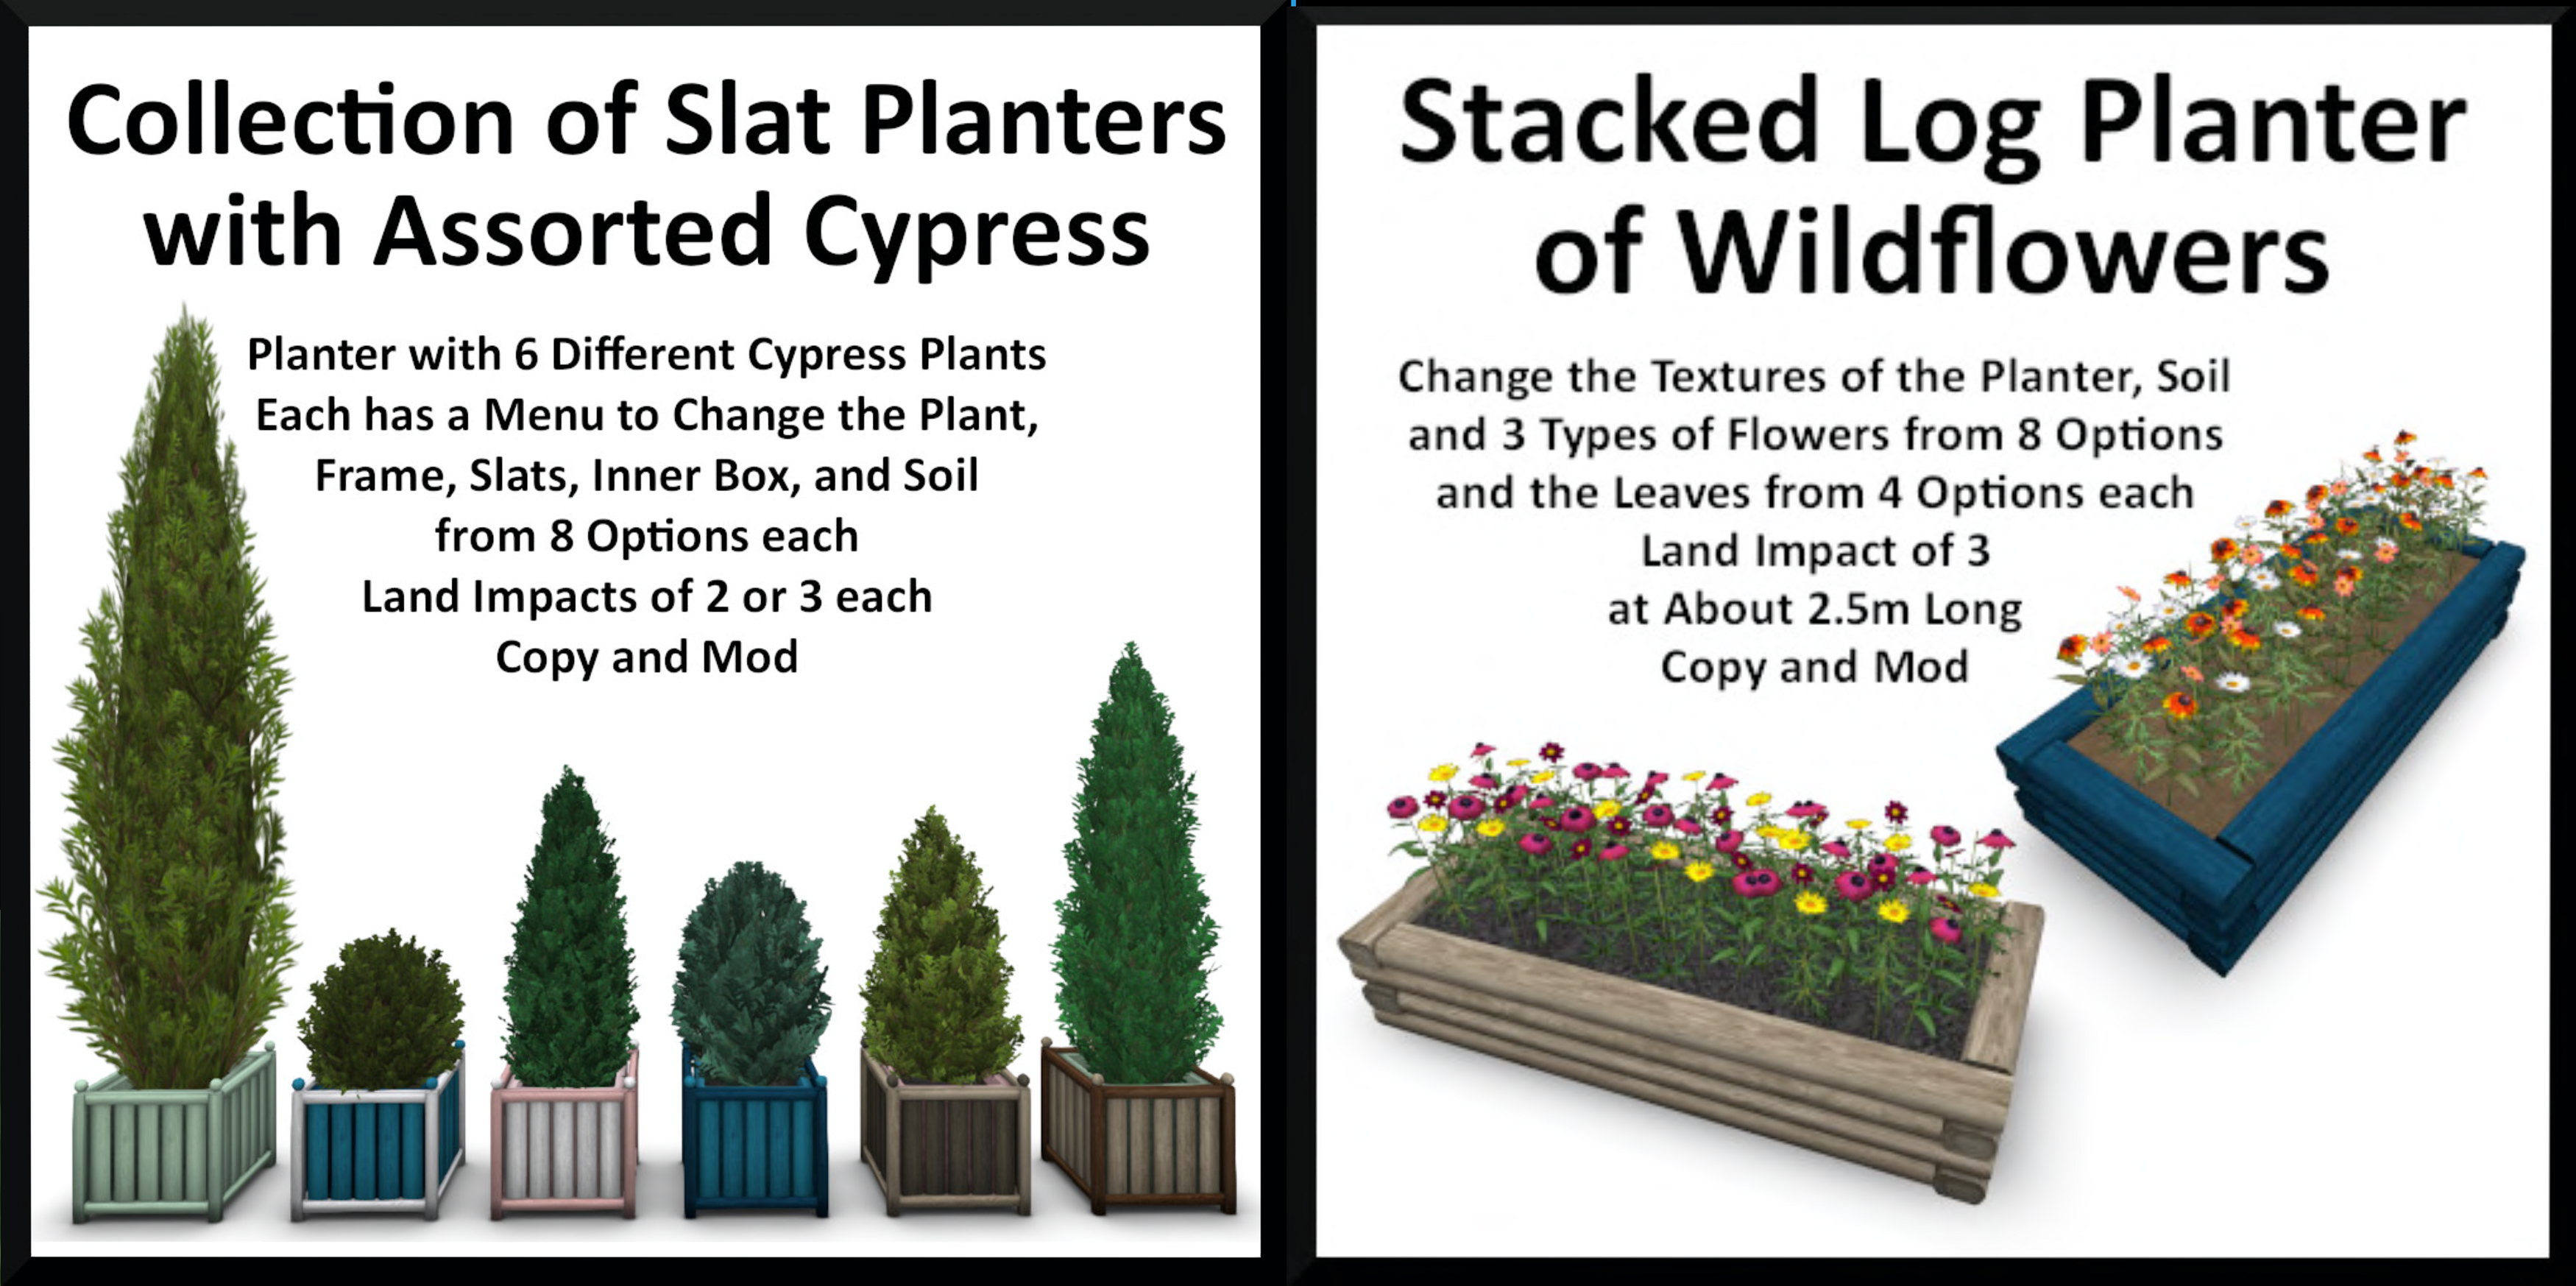 Evergreen – Slat Planters with Cypress & Stacked Log Planters with Wildflowers